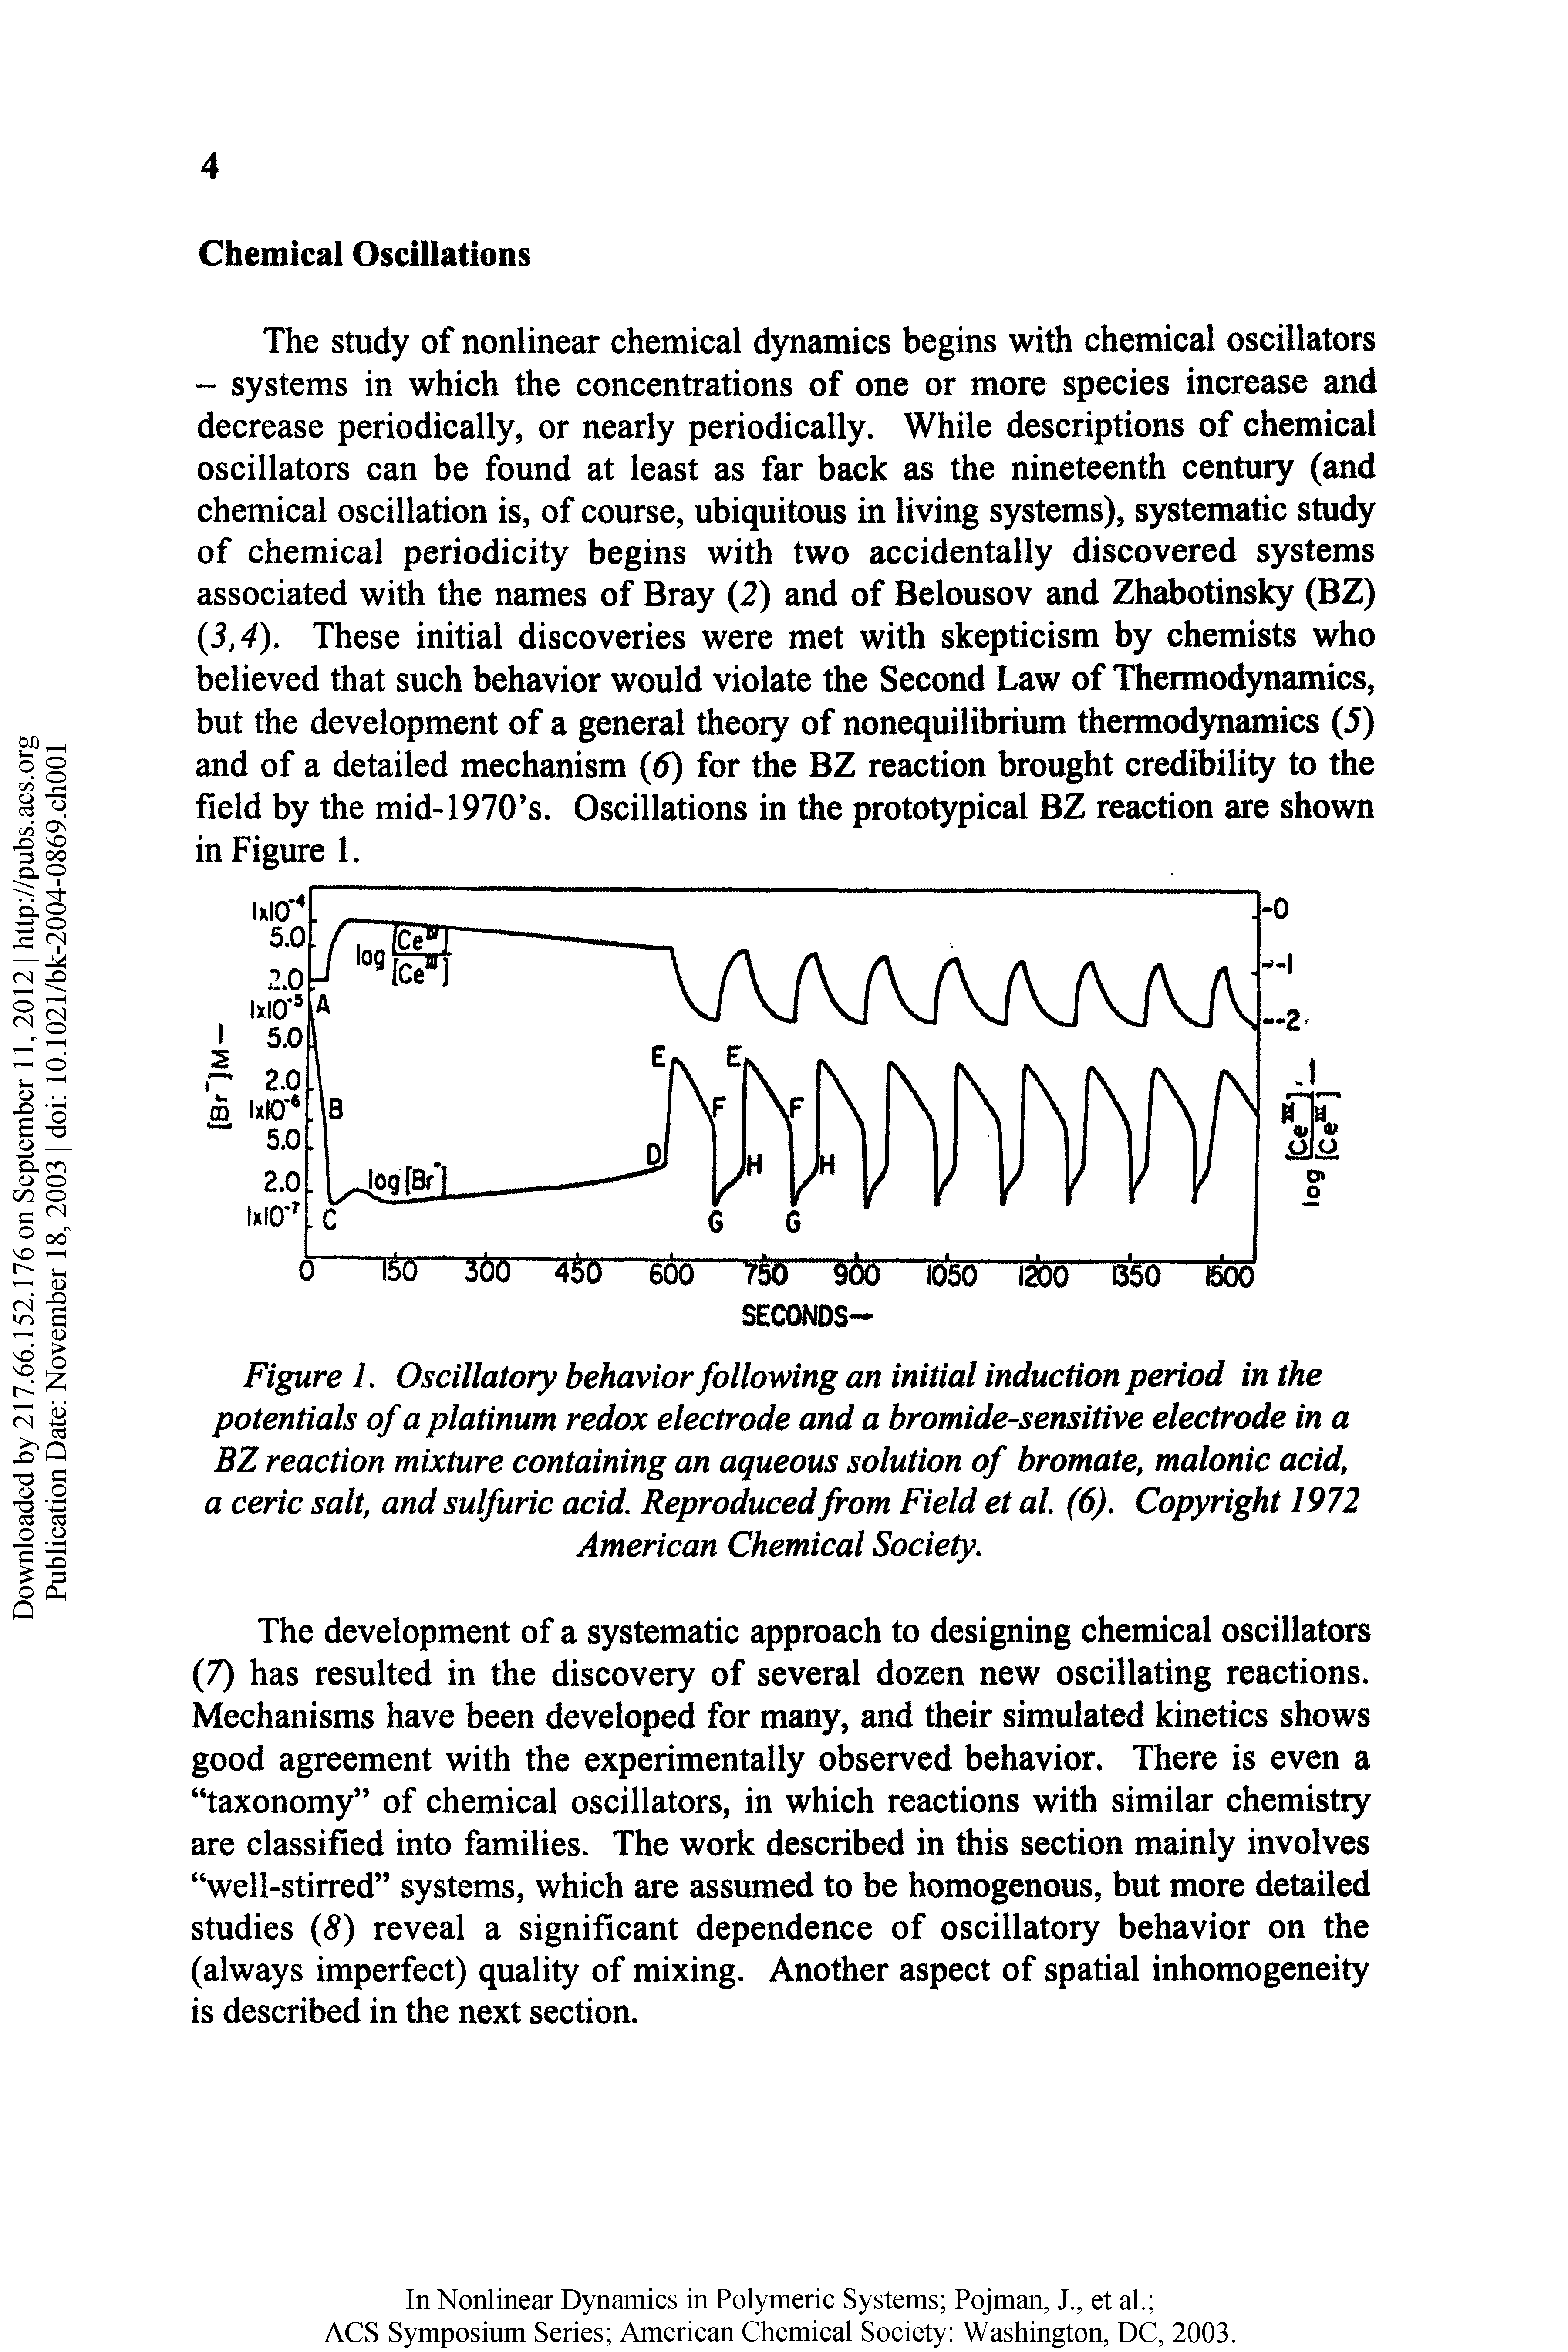 Figure 1. Oscillatory behavior following an initial induction period in the potentials of a platinum redox electrode and a bromide sensitive electrode in a BZ reaction mixture containing an aqueous solution of bromate, malonic acid, a ceric salt, and sulfuric acid. Reproduced from Field et al. (6). Copyright 1972 American Chemical Society,...